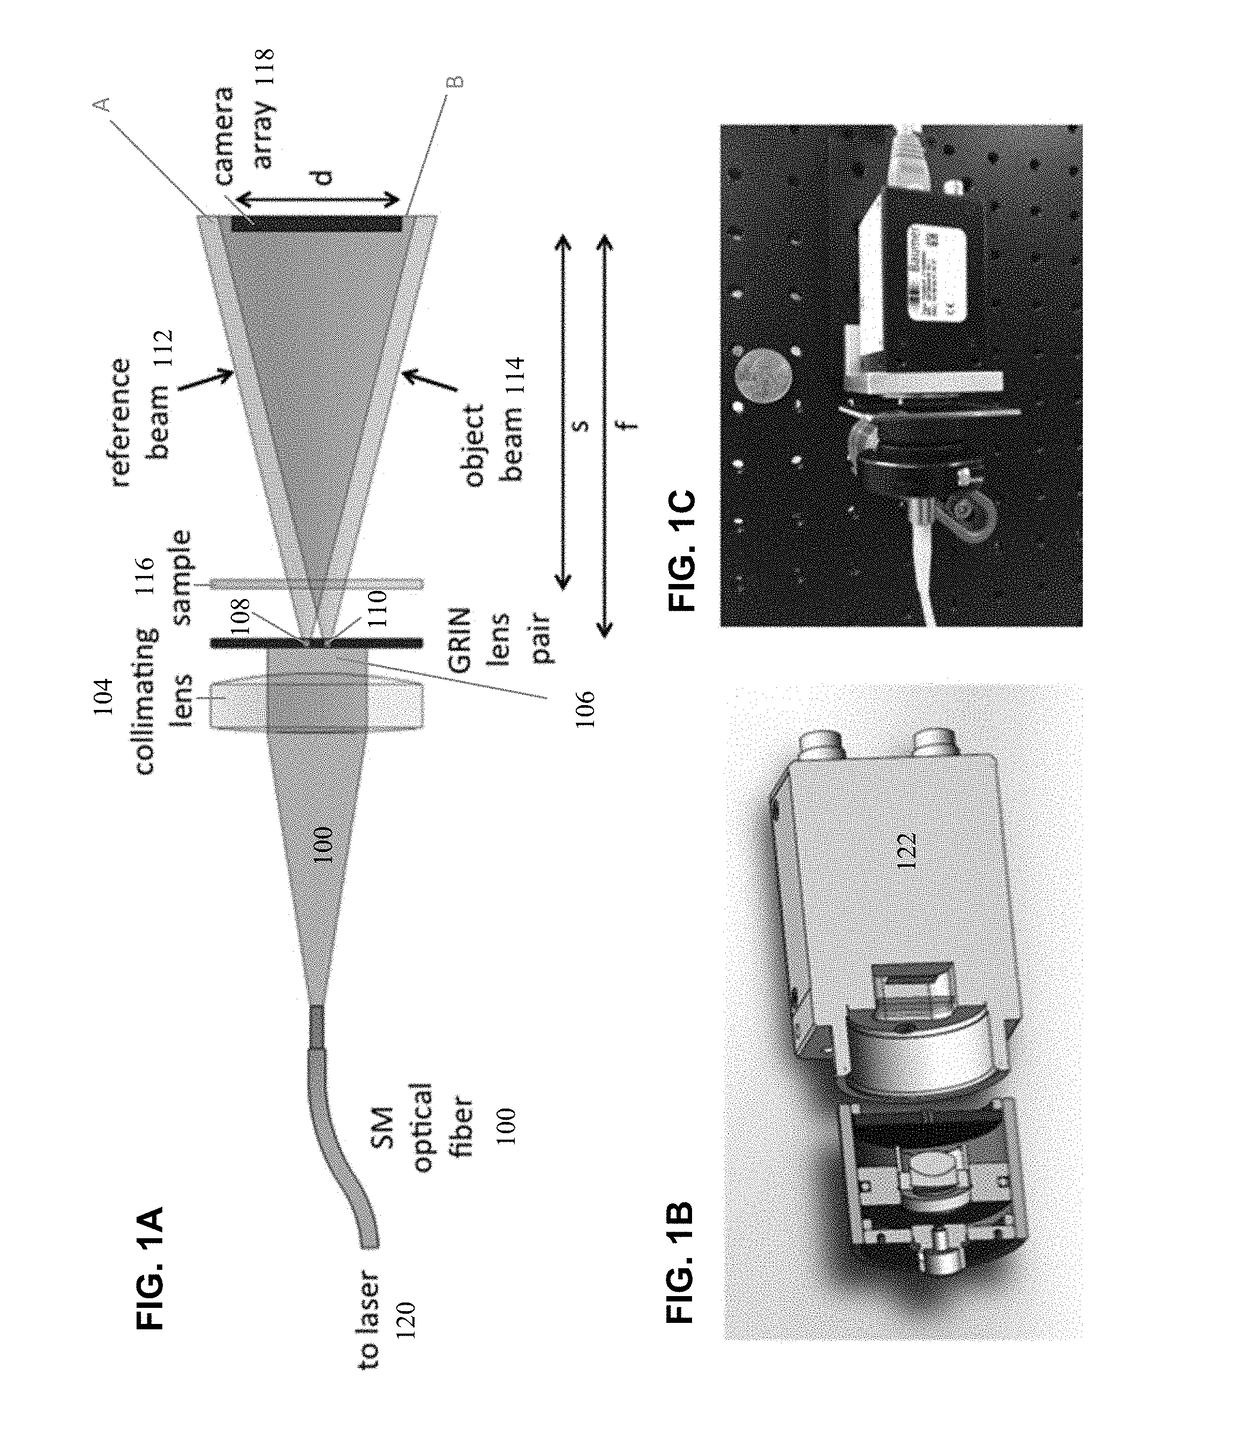 Compact digital holographic microscope for planetary imaging or endoscopy